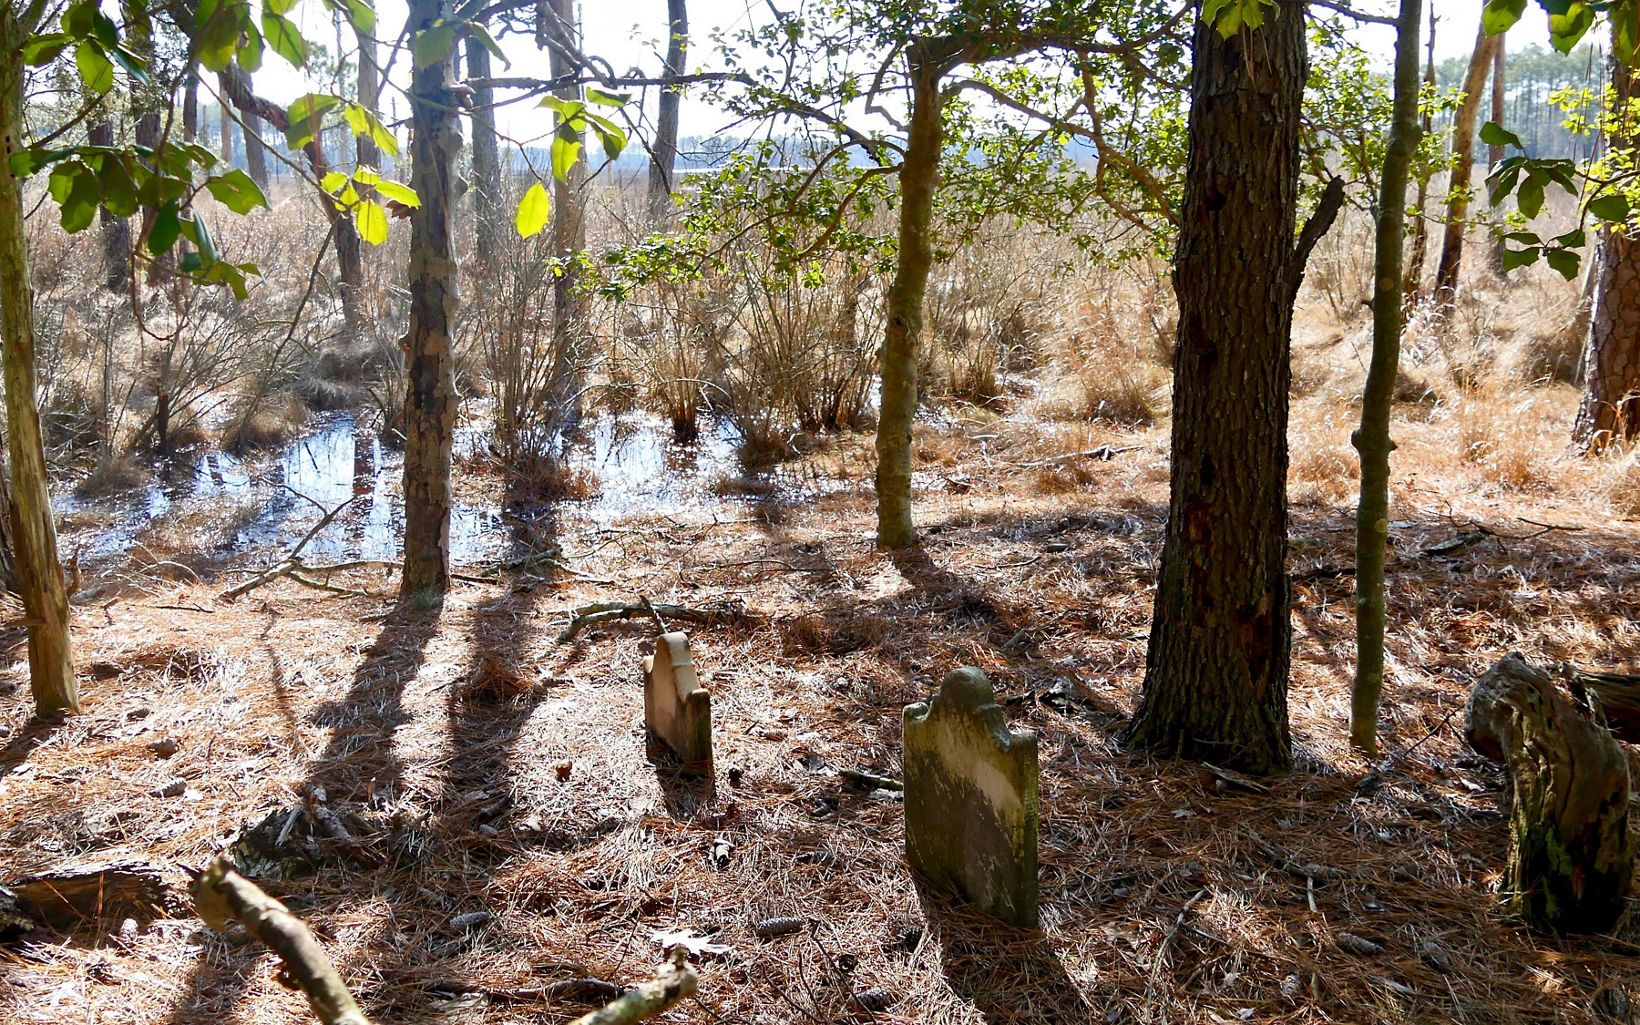 A shallow pool of standing water next to two small headstone. Pine trees and low scrub stand between the old family cemetery and the open water of the Chesapeake Bay in the background.